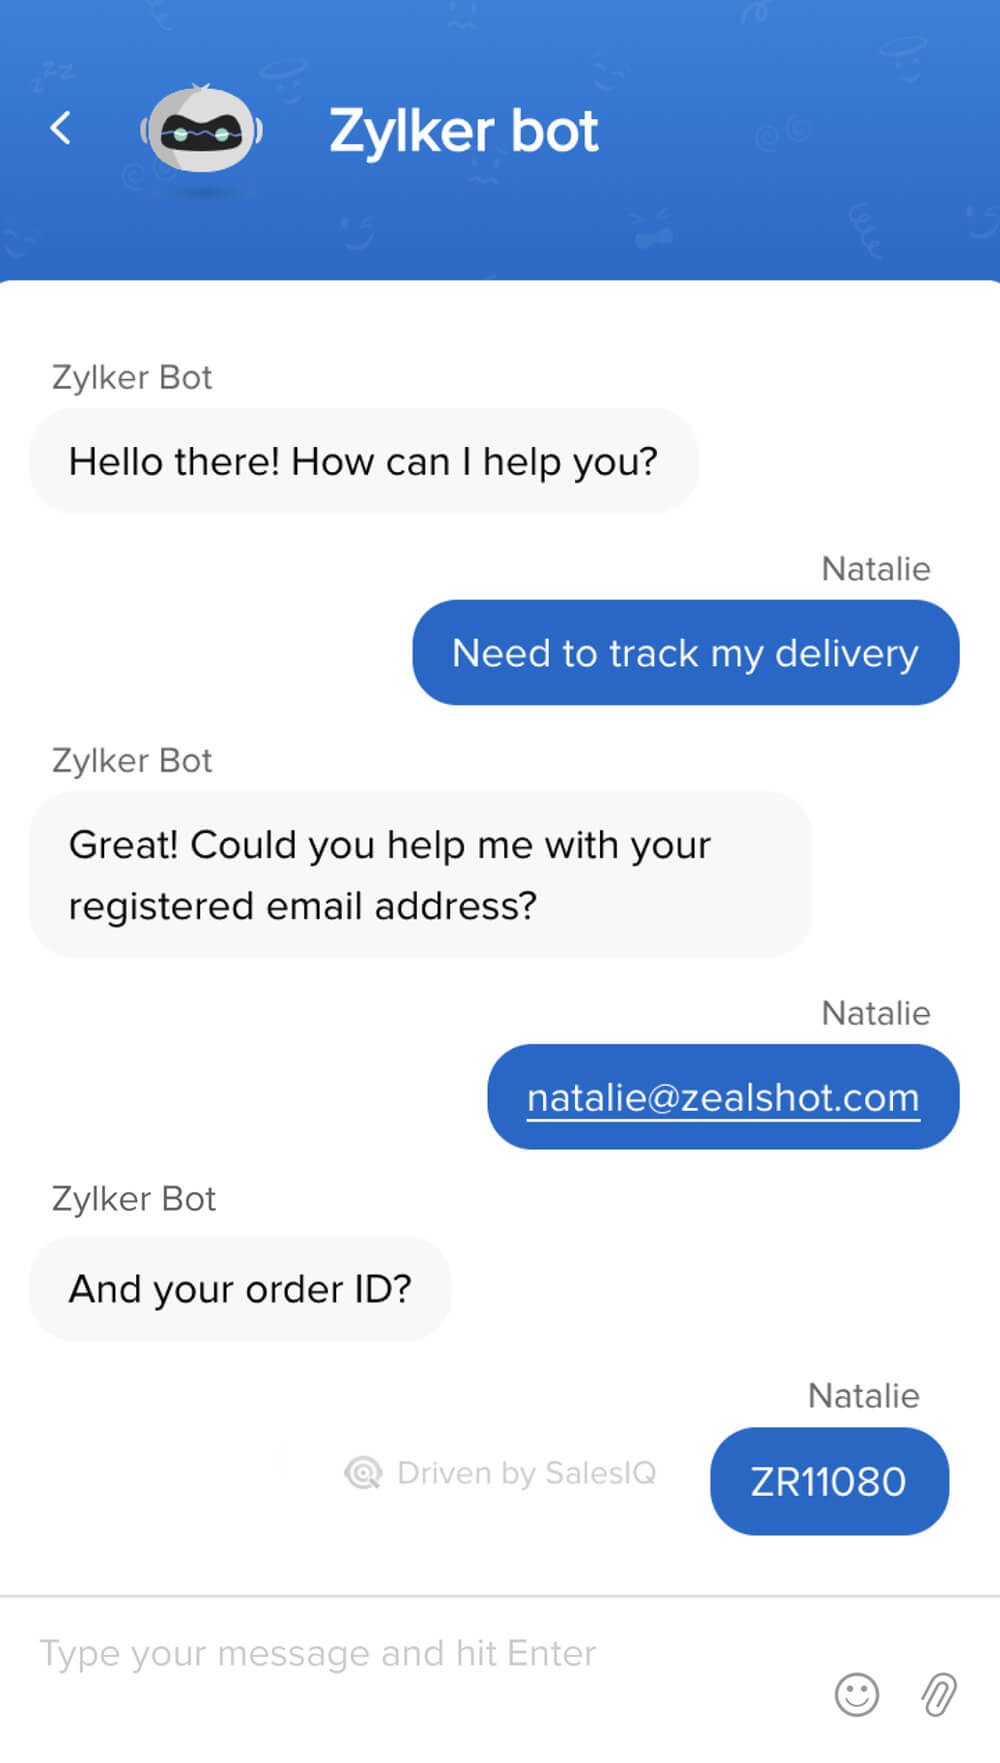 Offer 24/7 customer support with chatbots